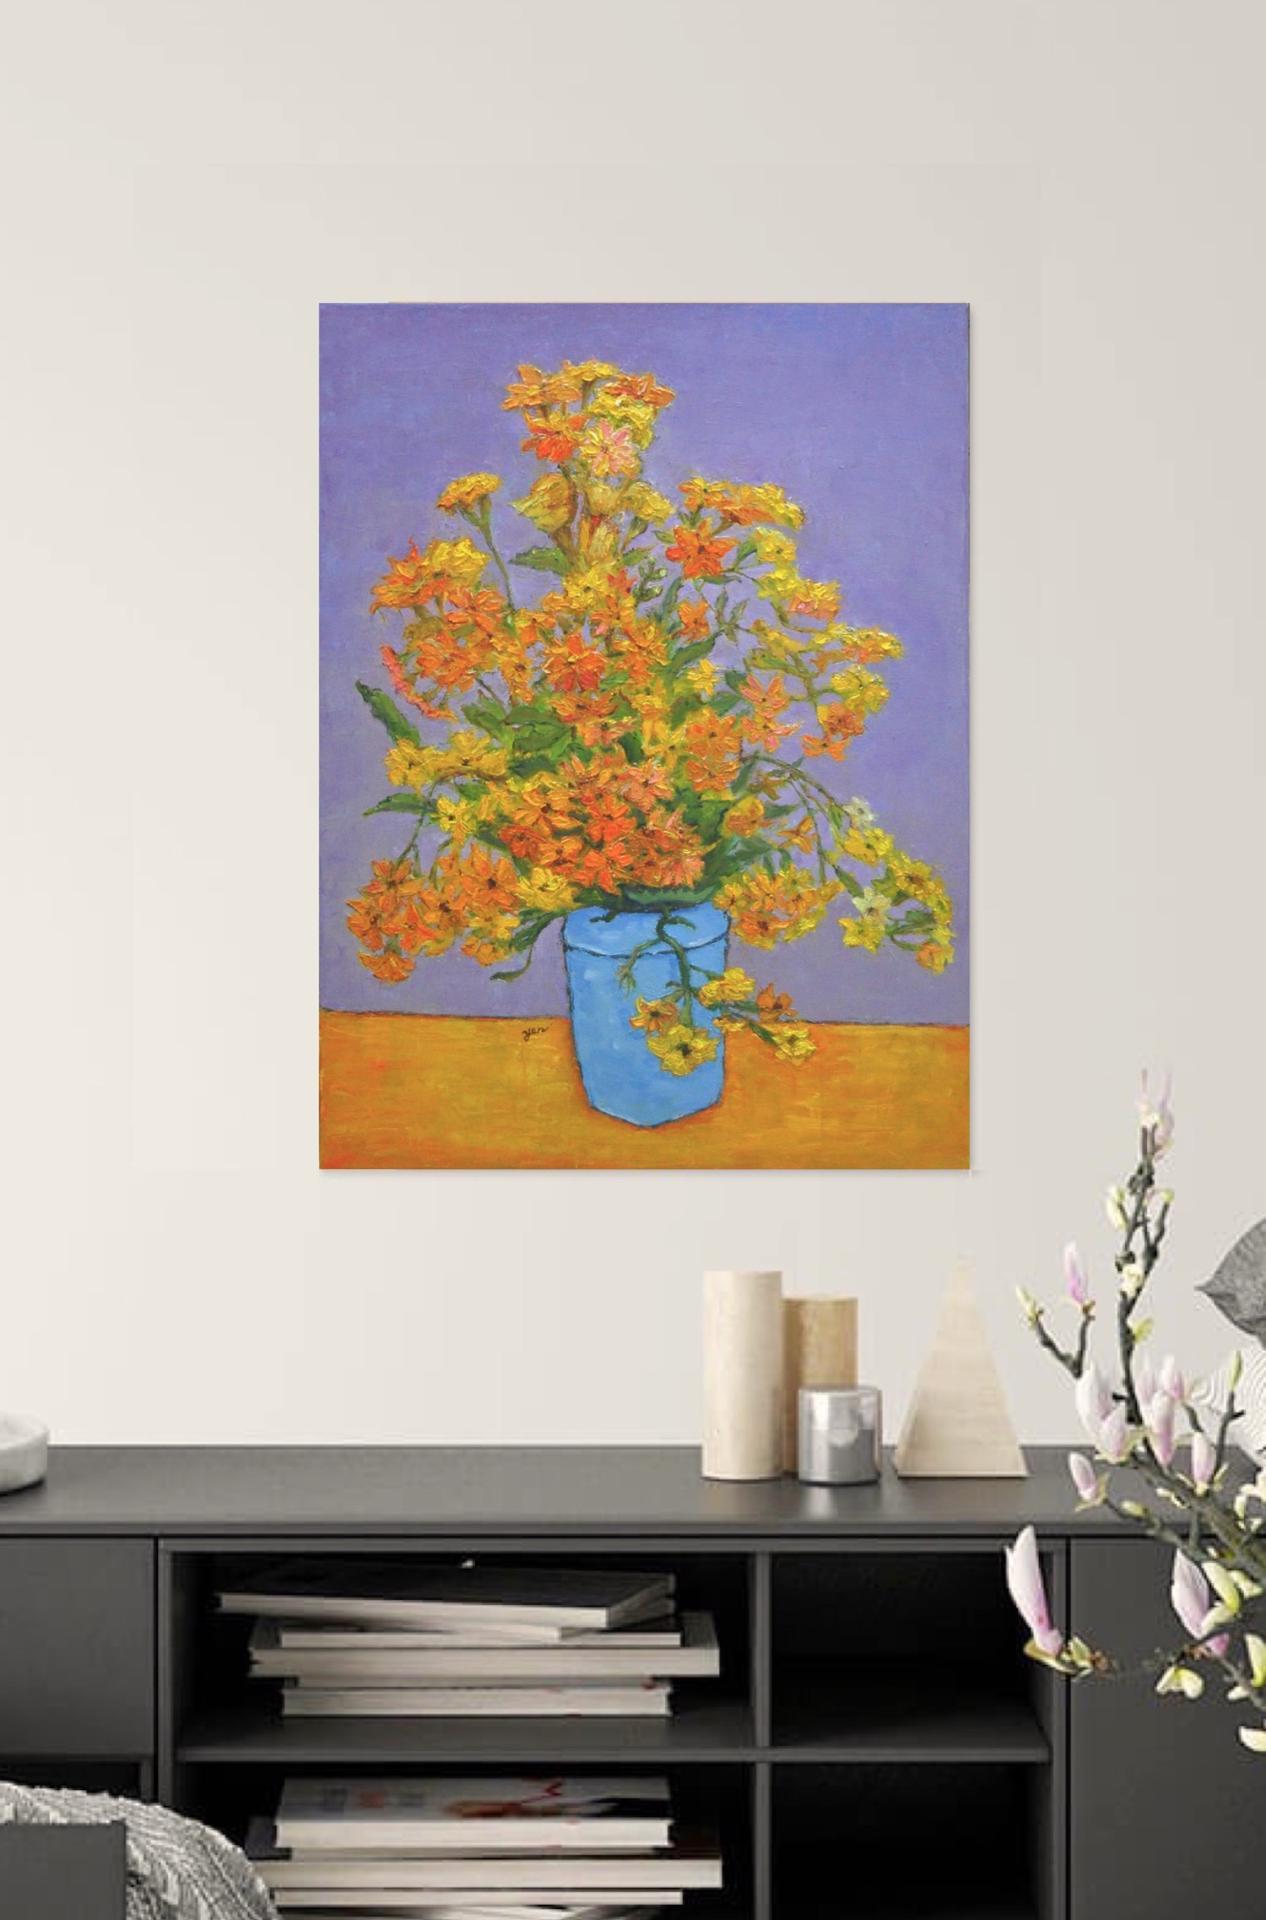 Yellow Flowers in Blue Pot Original Oil Painting - Impressionist Style Still Life - Hand-Painted Fine Art - Home Decor - Unique Gift Idea